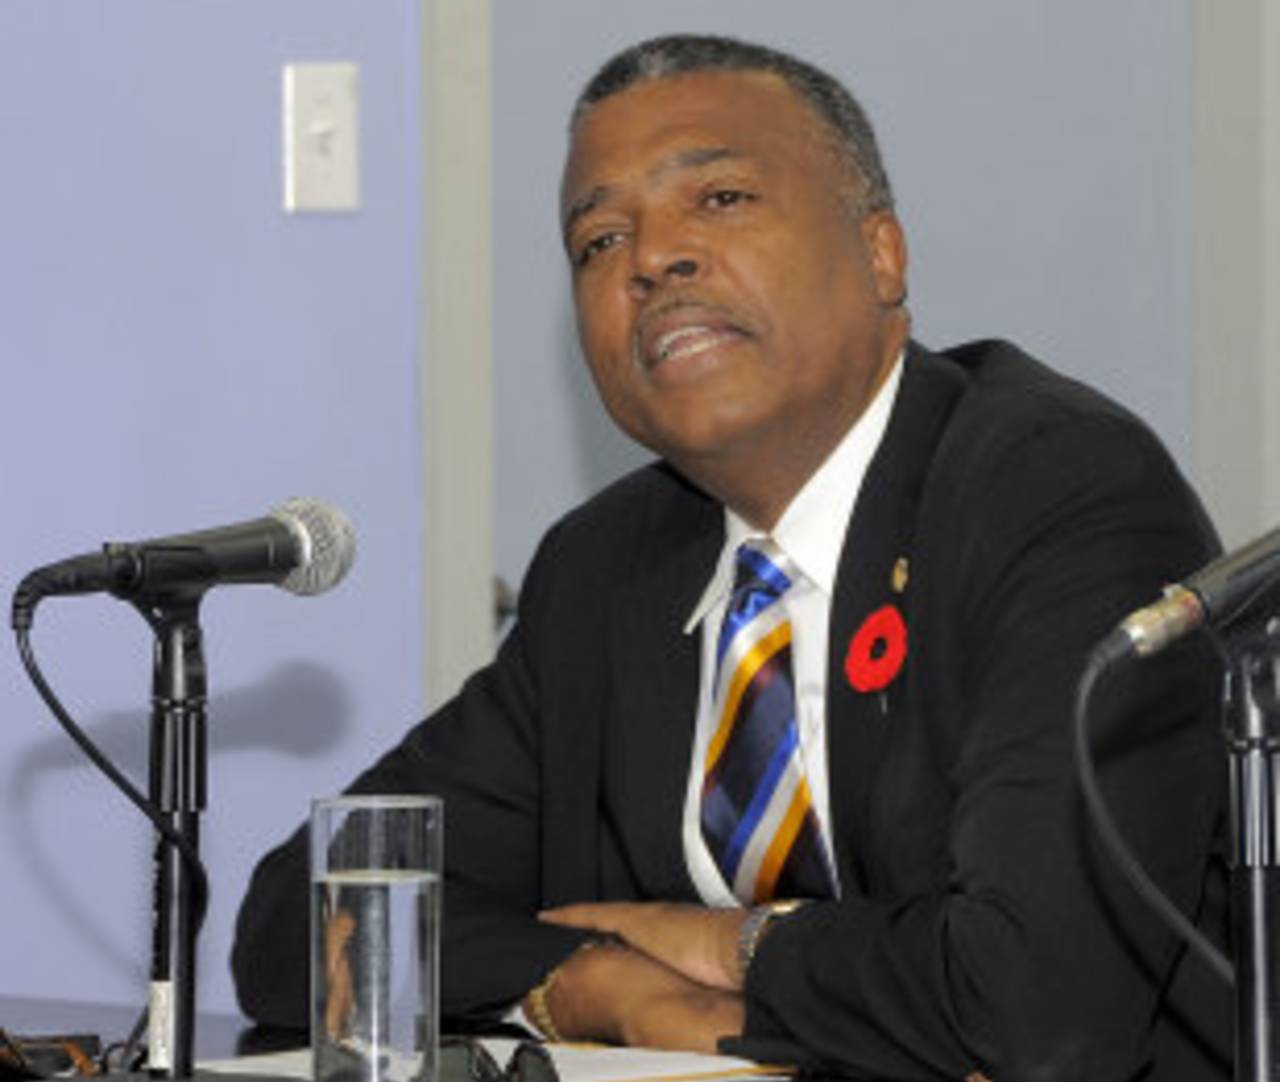 West Indies Cricket Board CEO Michael Muirhead speaks at the Introductory Media Conference at Kensington Oval, Barbados, October 22, 2012 